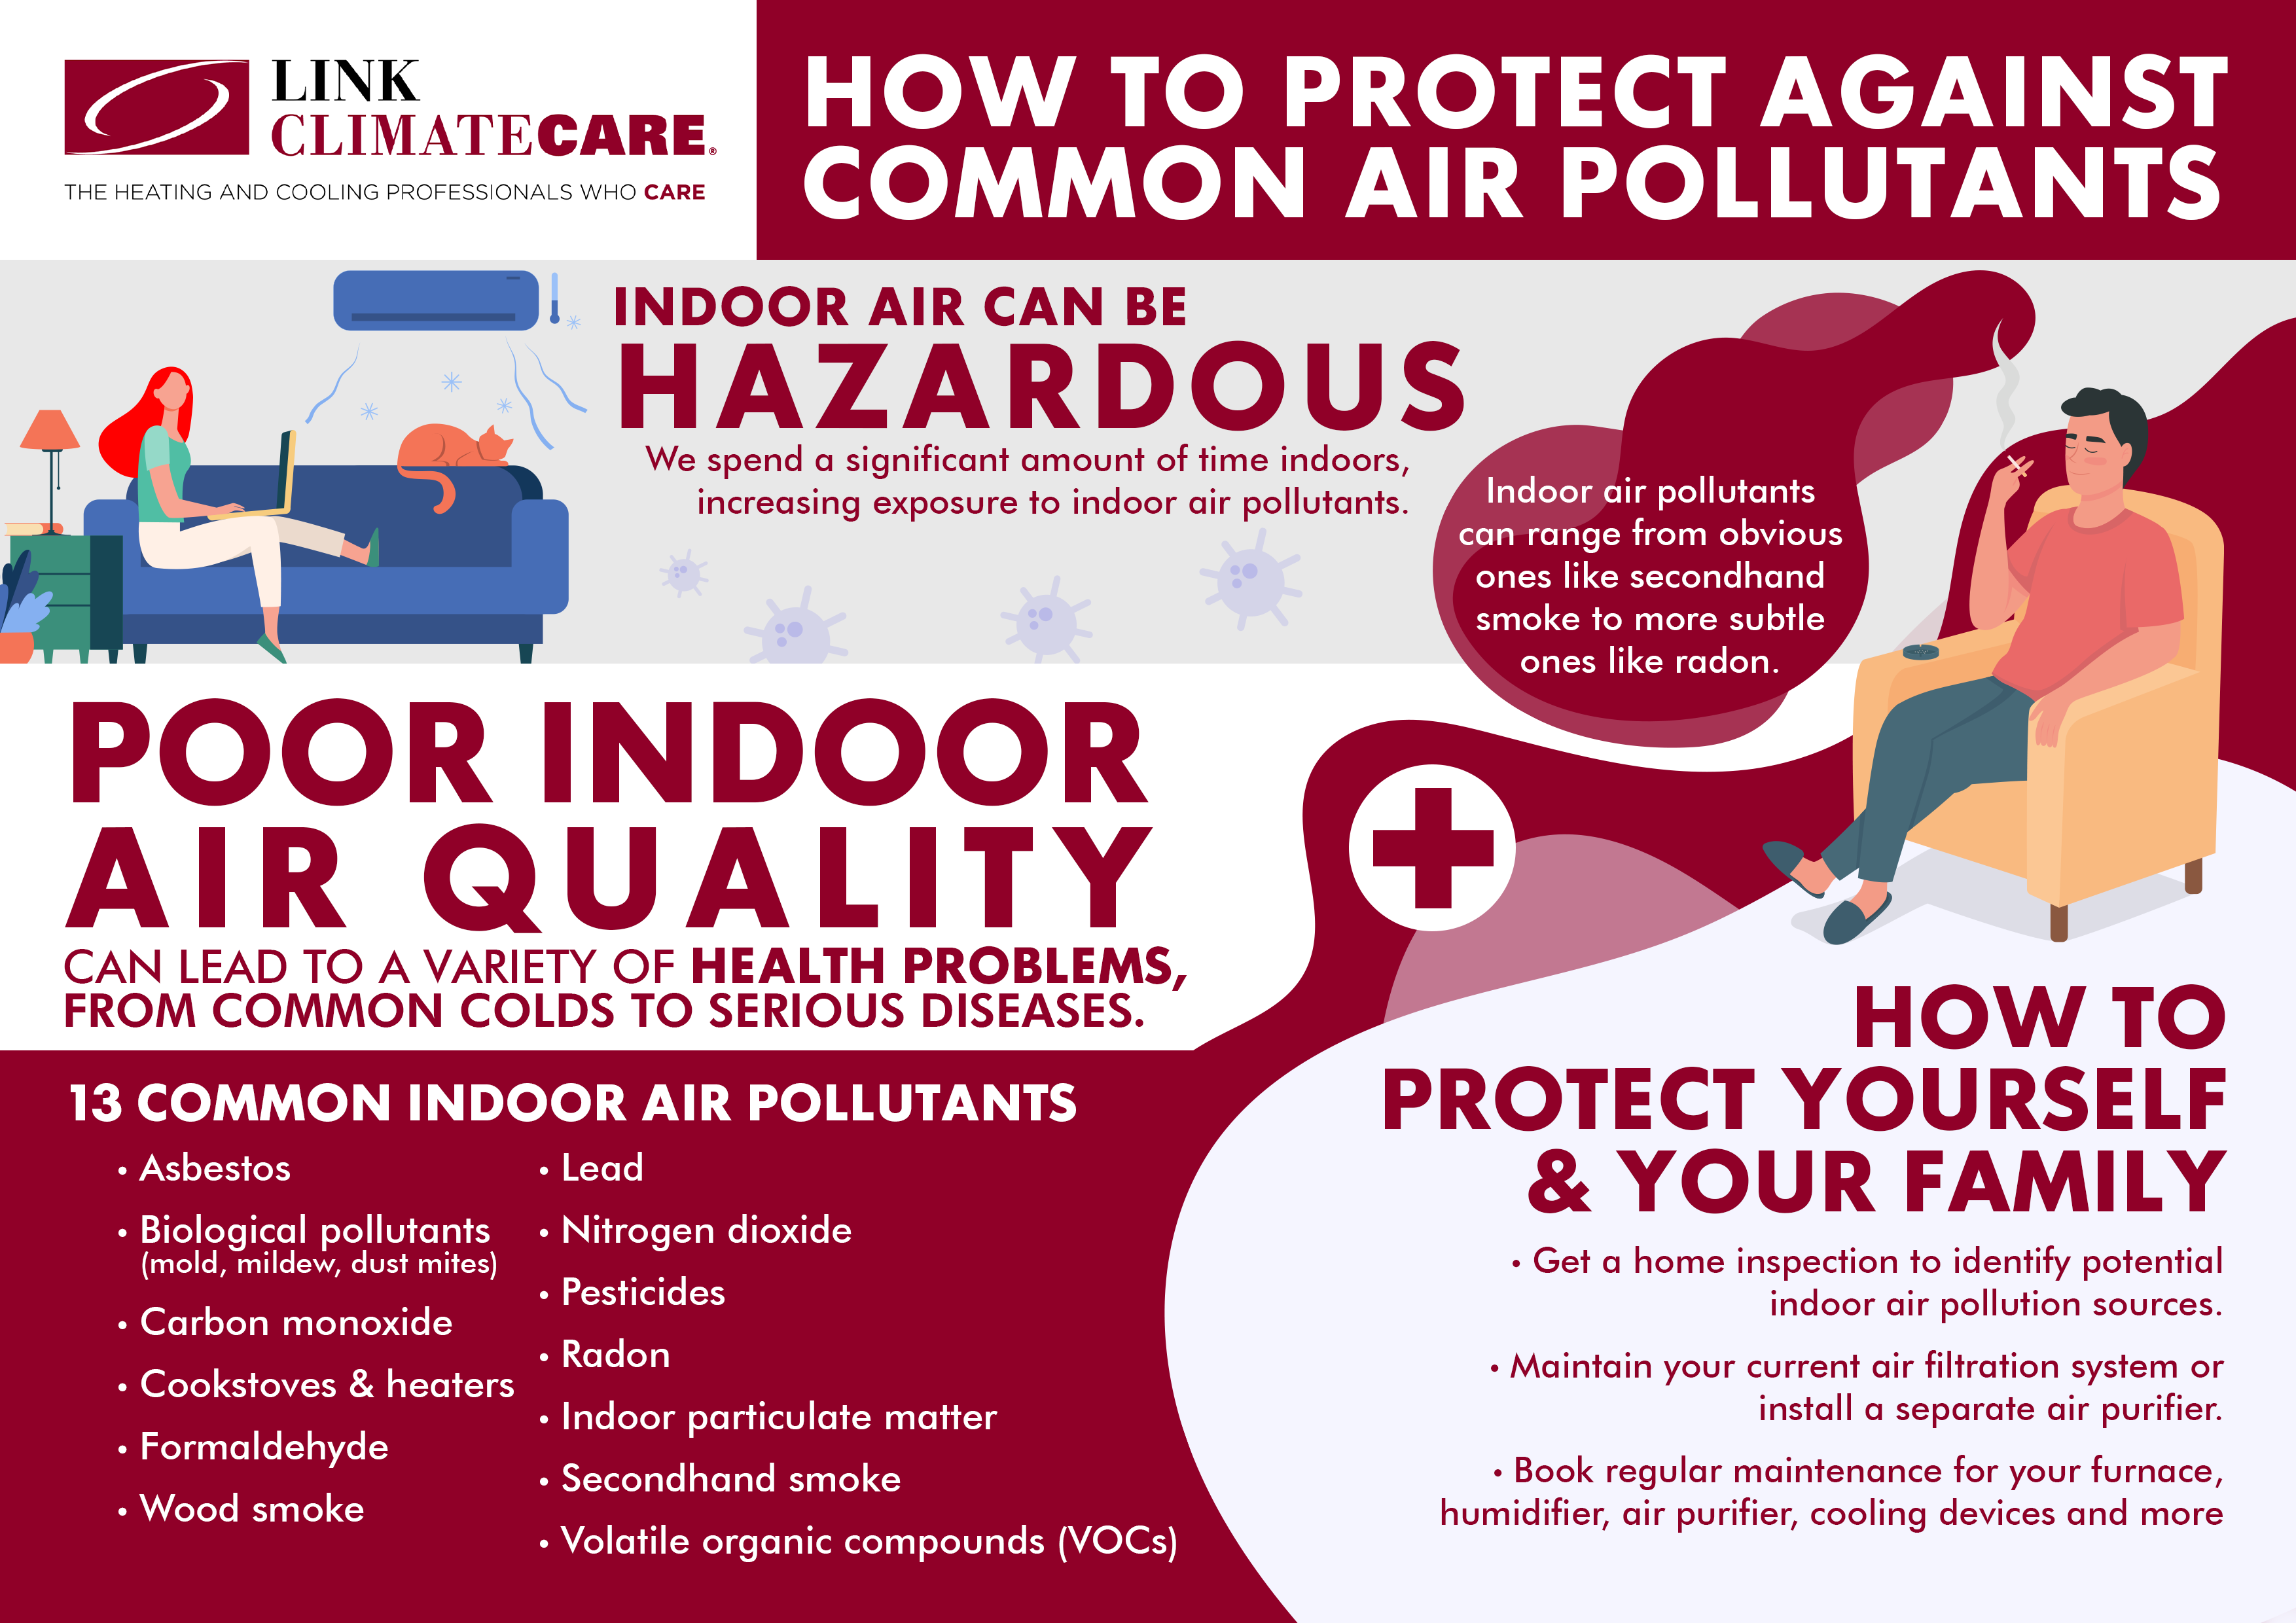 Infographic- How to Protect Against Common Air Pollutants - 13 COMMON INDOOR AIR POLLUTANTS & WHAT TO DO ABOUT THEM